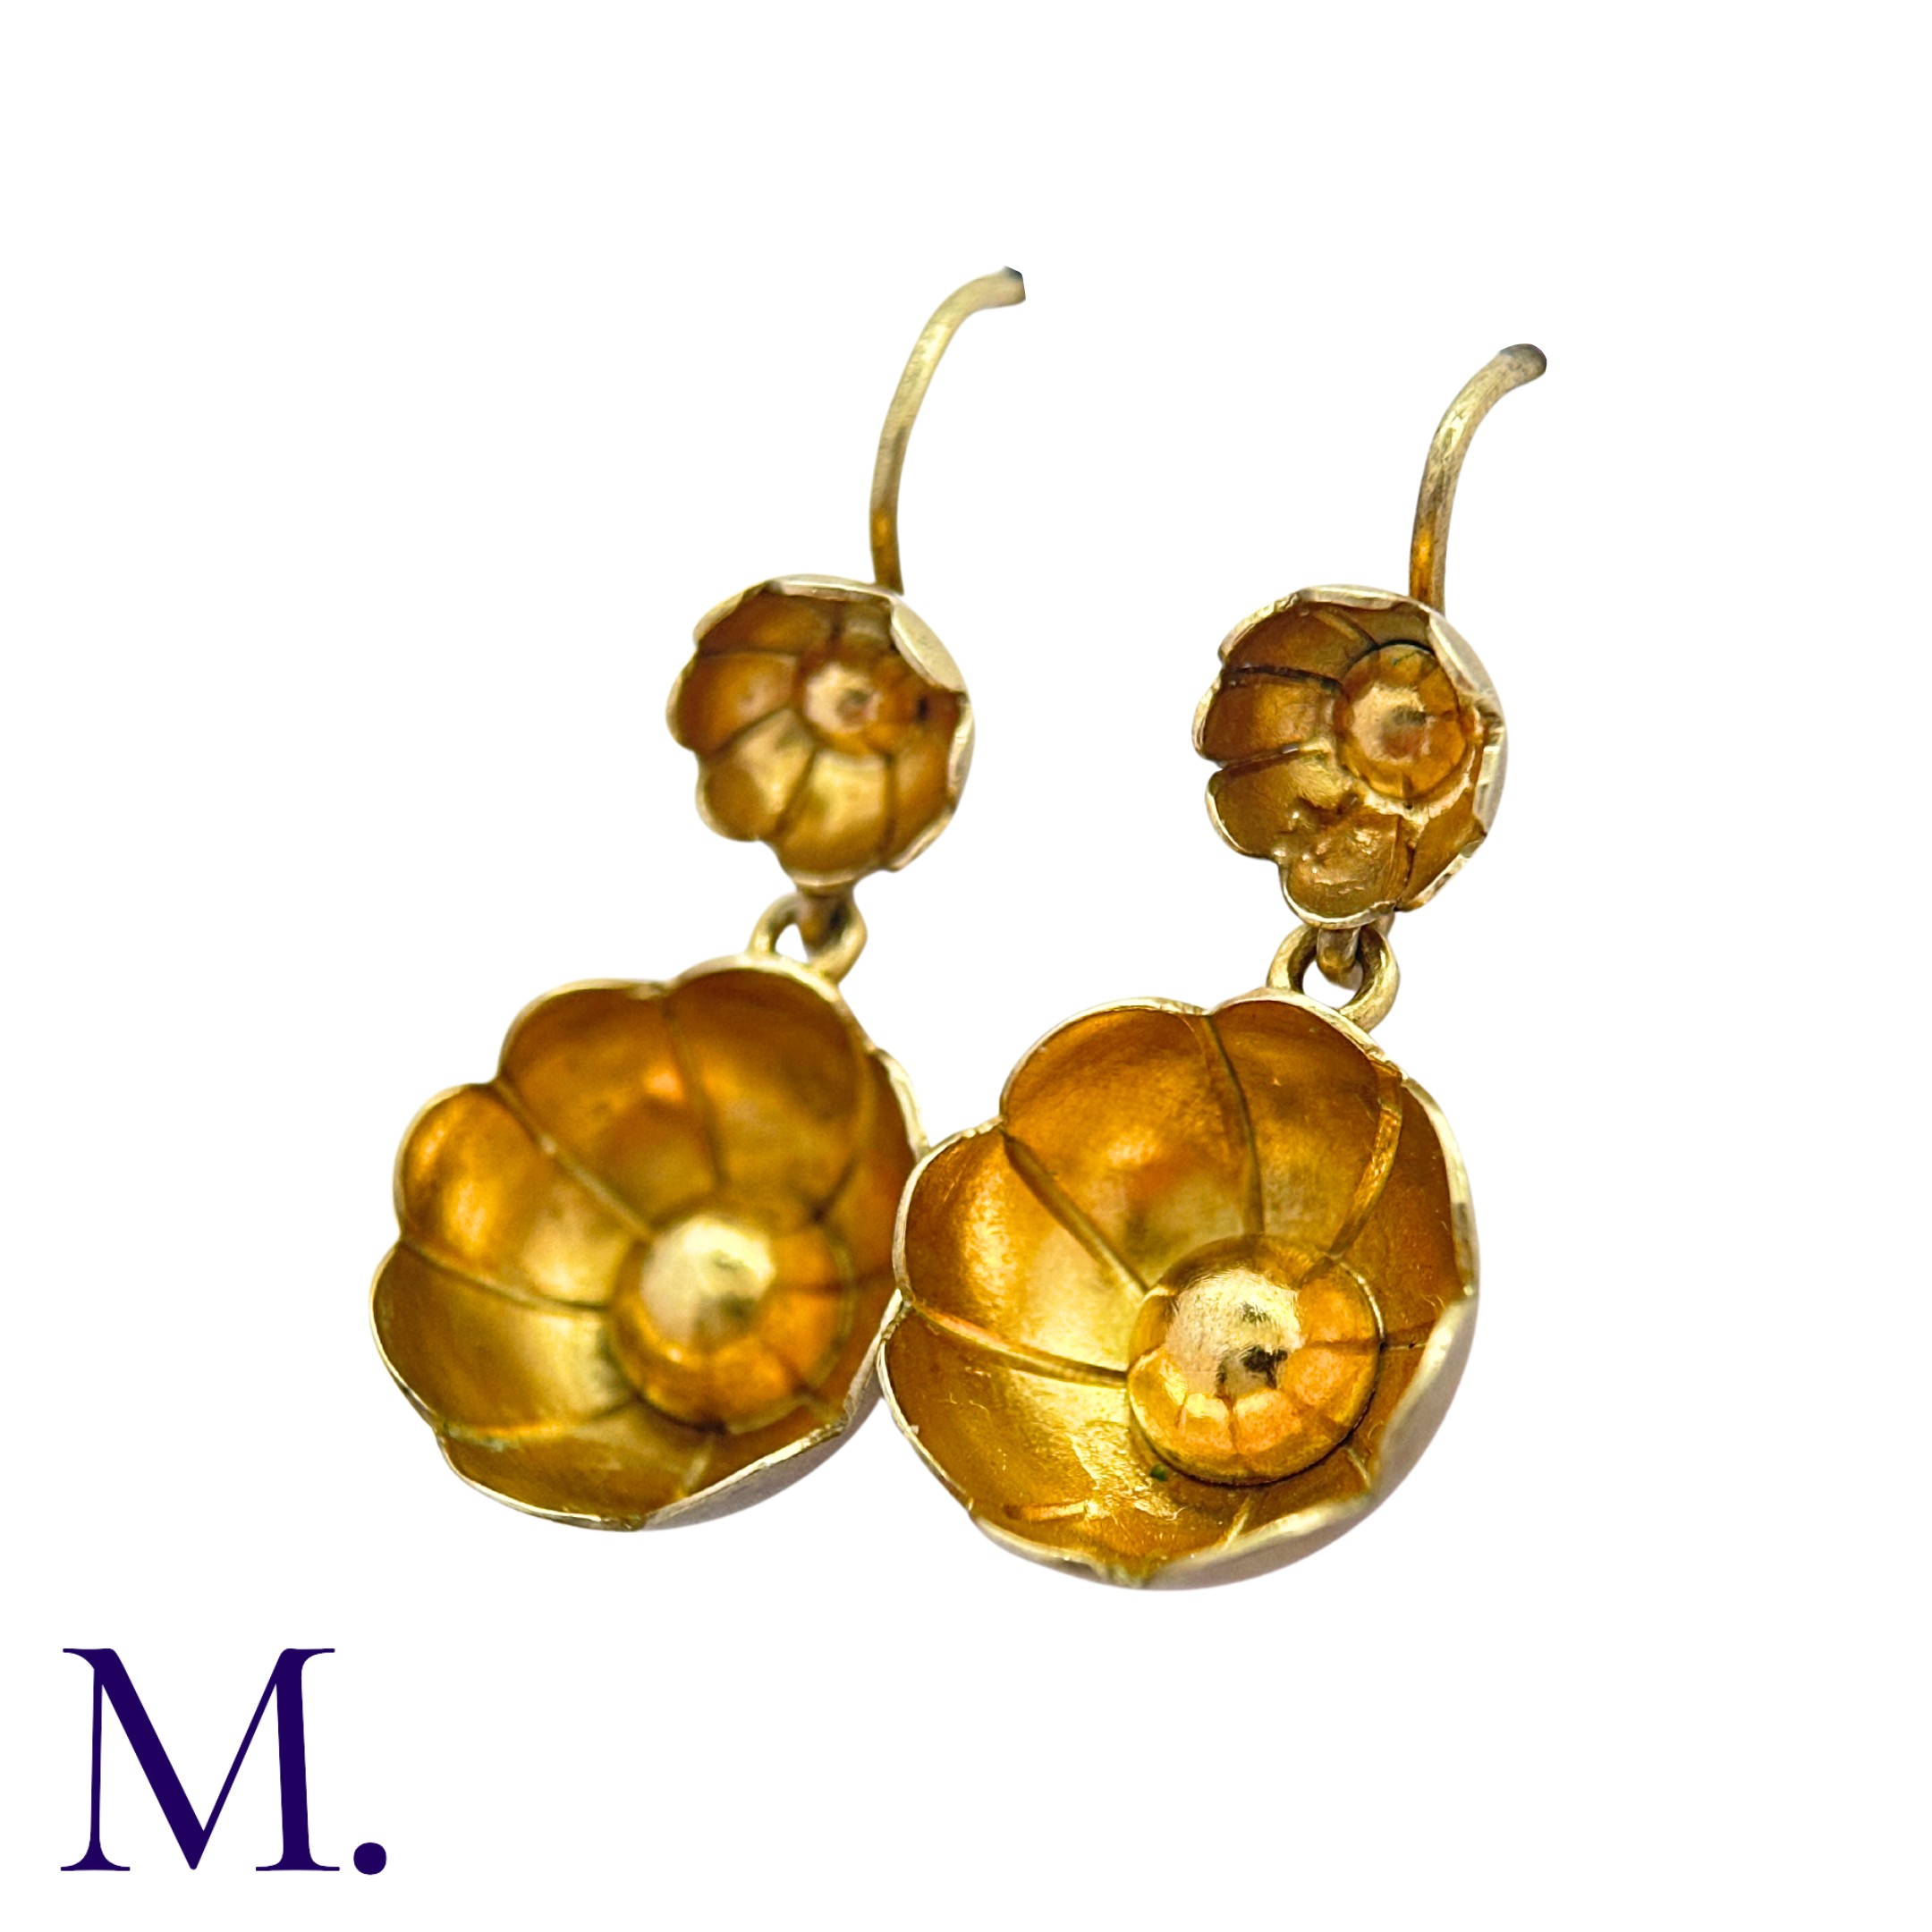 A Pair of Silver Gilt Earrings in floral form. Size: 2.9cm Weight: 2.8g